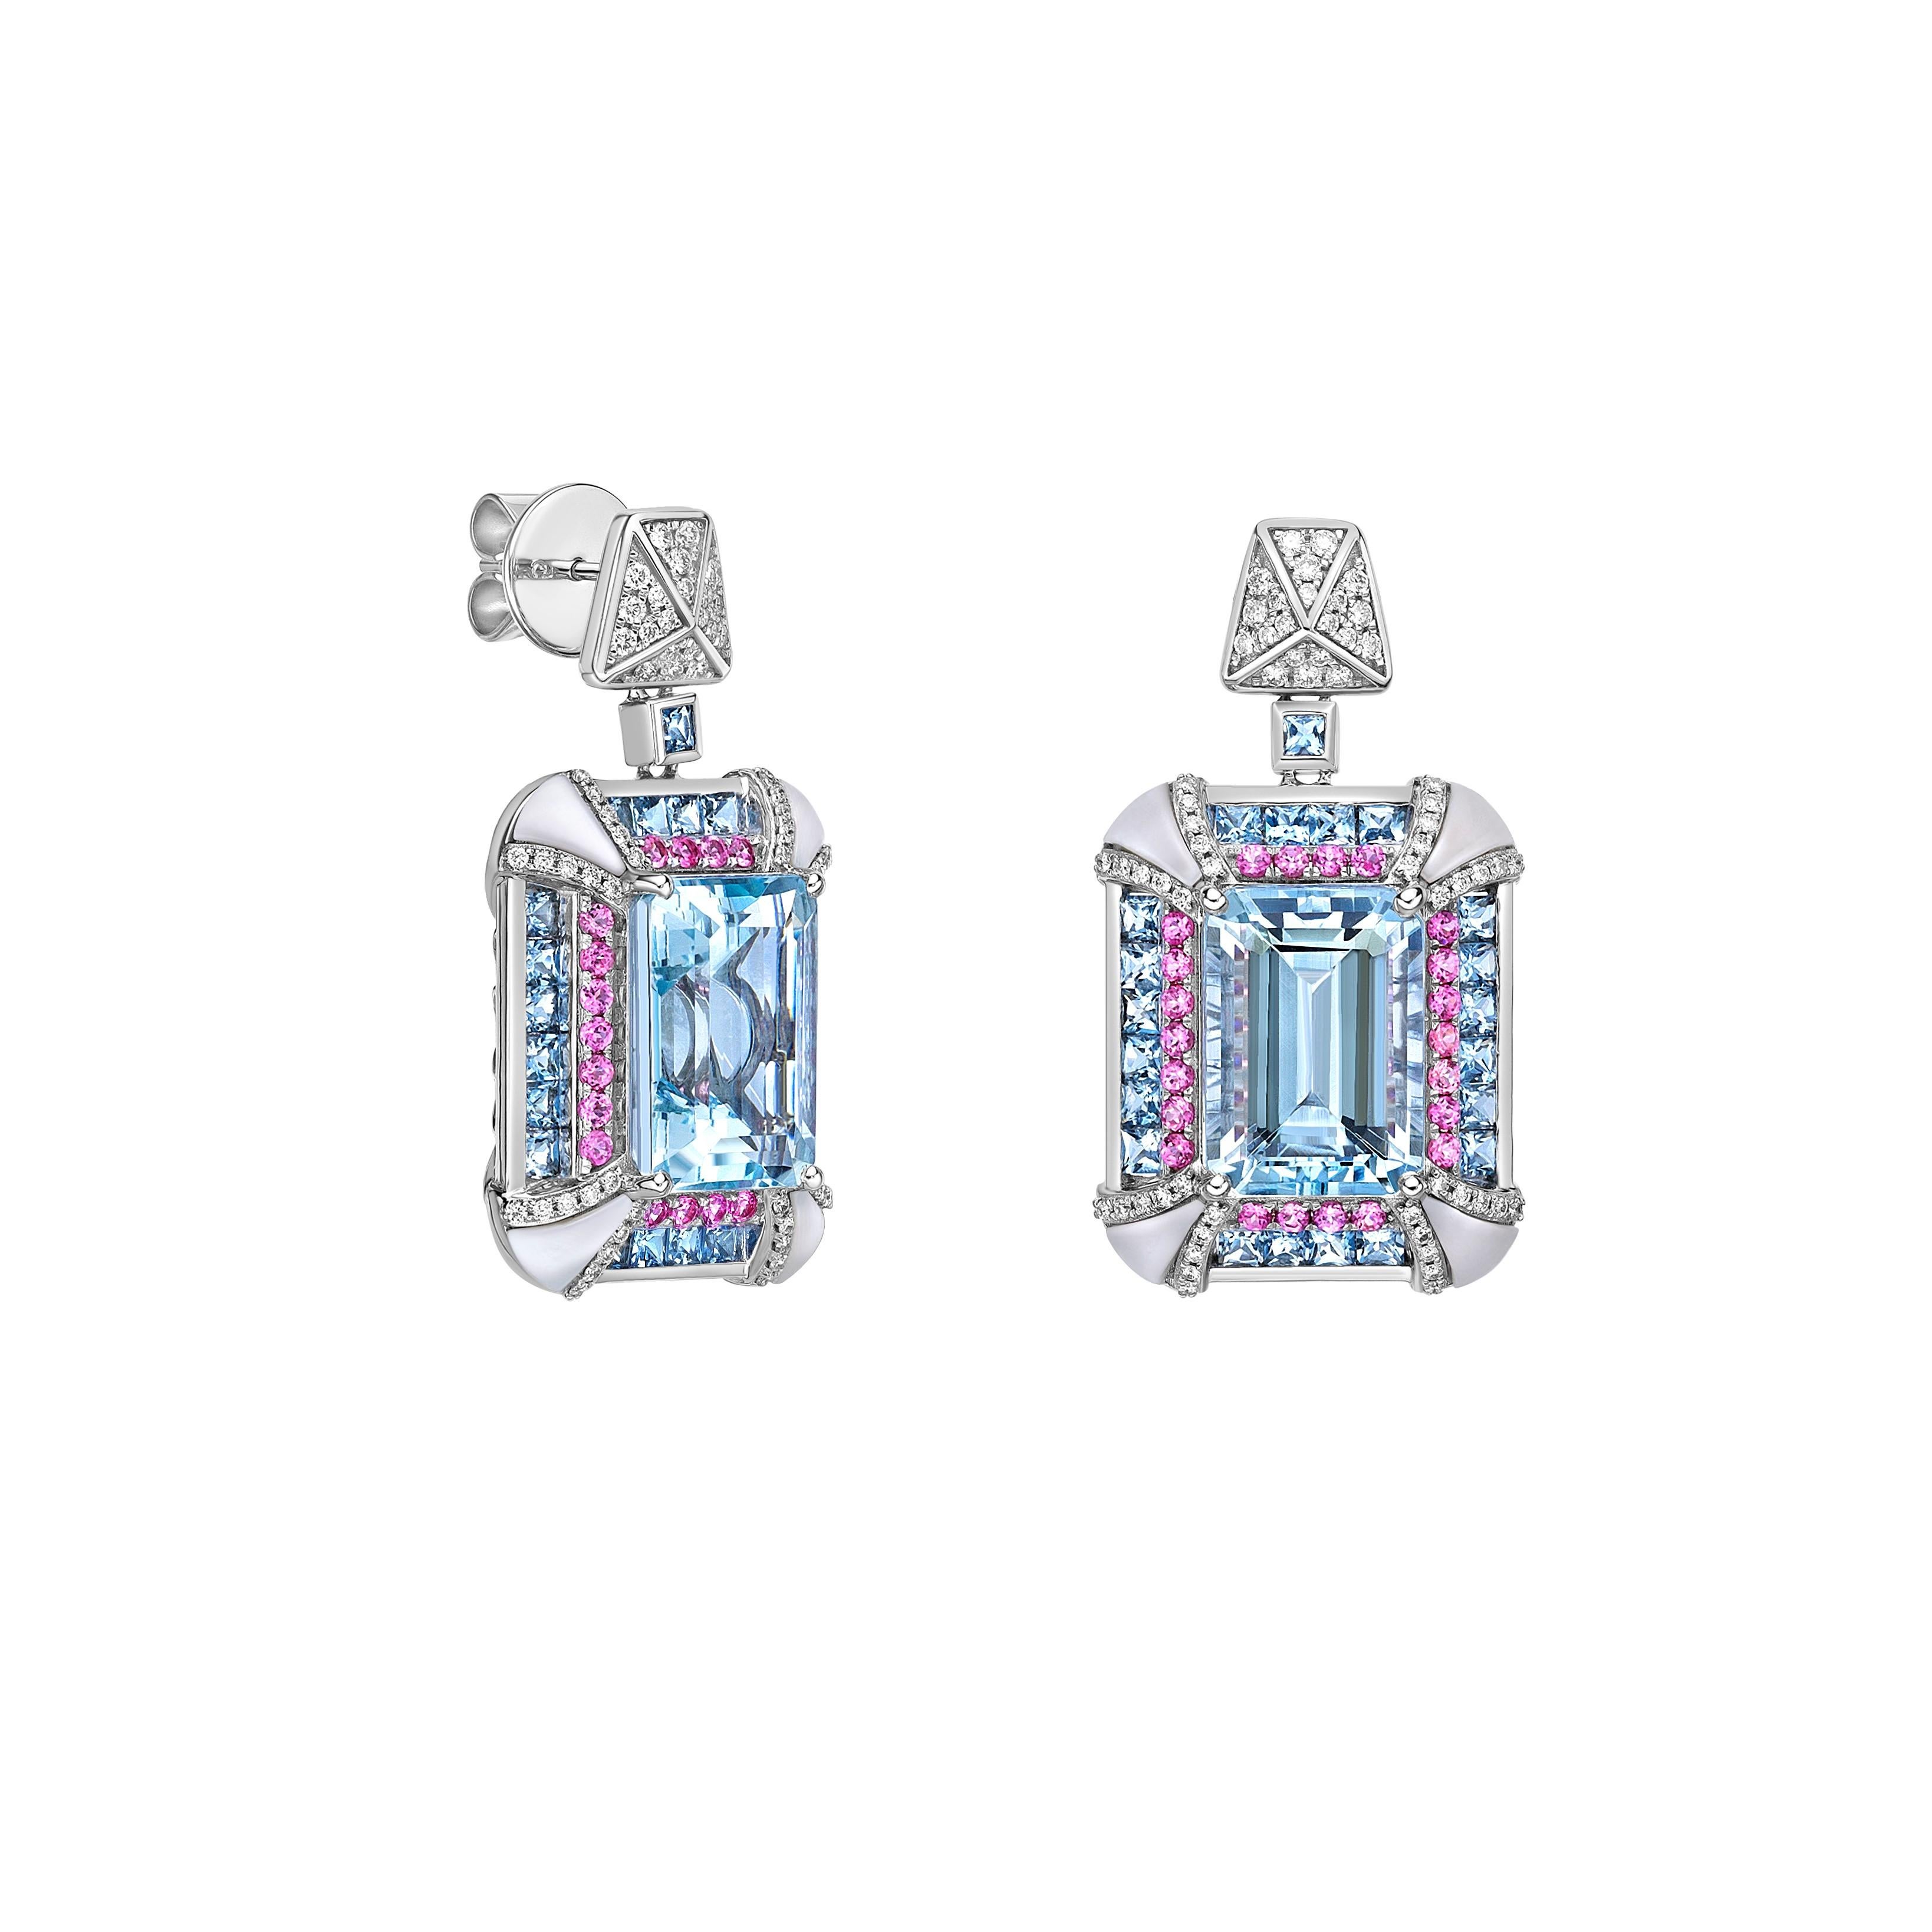 This collection features an array of aquamarines with an icy blue hue that is as cool as it gets! These earrings are uniquely designed in an art deco style and sit on a frame on pink mother of pearl with pink spinel, aquamarine and diamond accents.